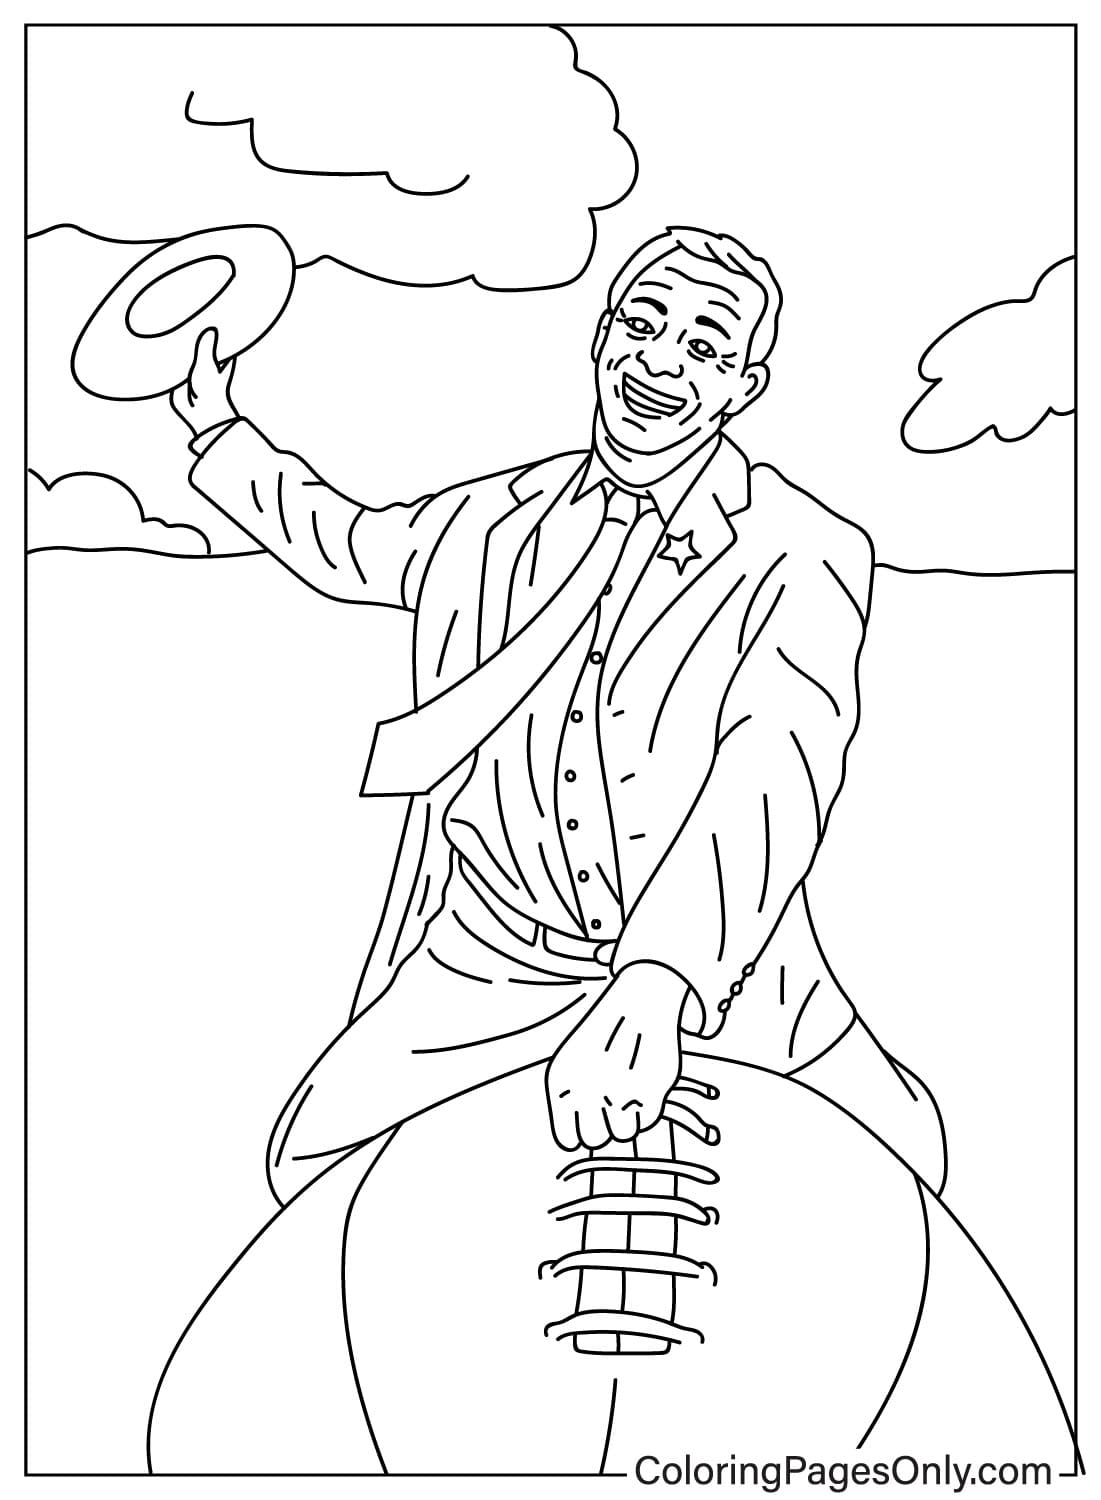 Jerry Jones Coloring Page from Dallas Cowboys